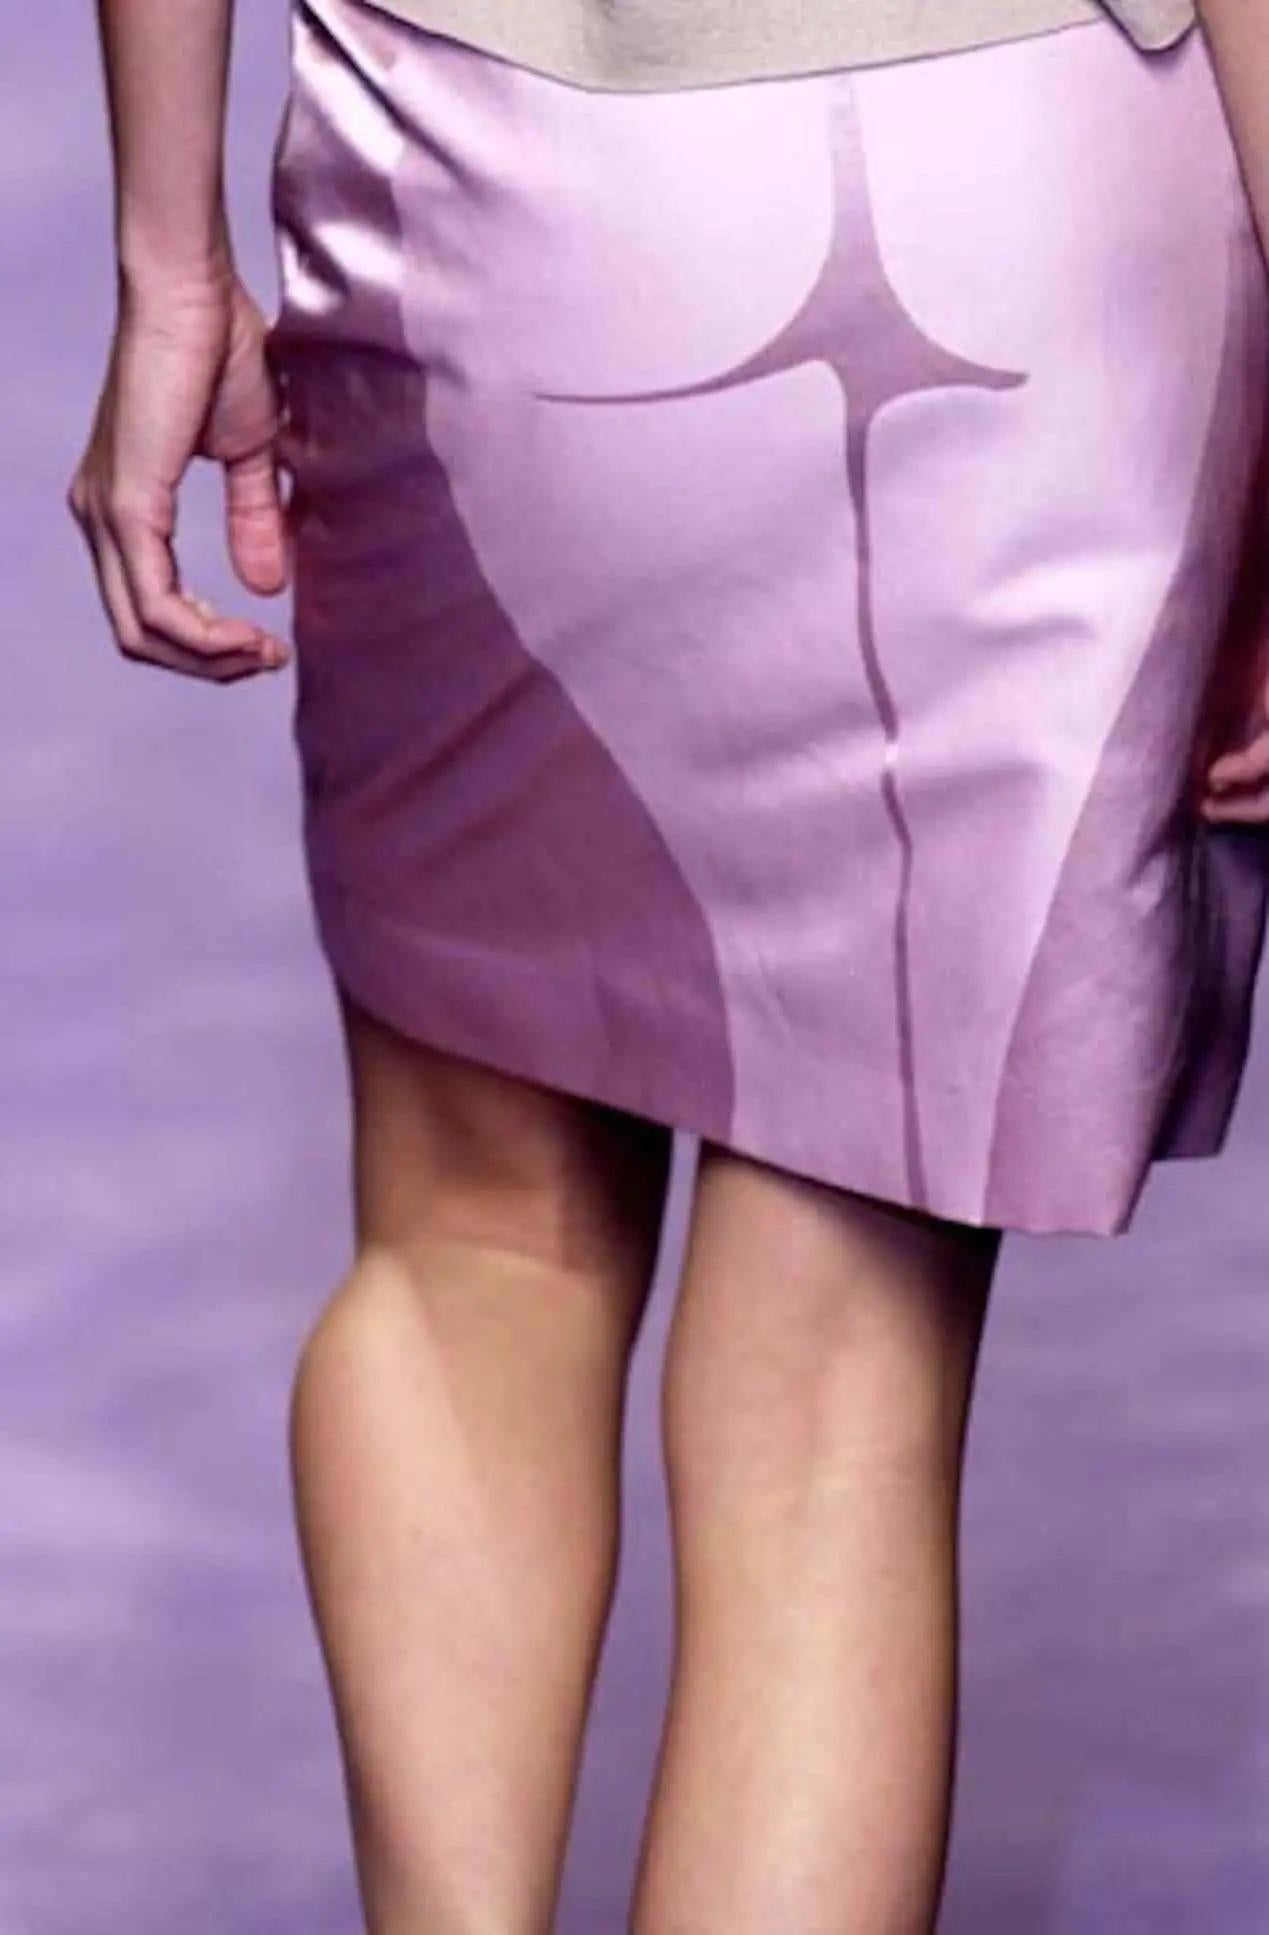 Presenting a fabulous navy silhouette skirt from Yves Saint Laurent Rive Gauche, designed by Tom Ford for the Spring/Summer 2003 collection. This skirt, initially debuted in pink as part of look 6 and modeled by Mariacarla Boscono. This seemingly